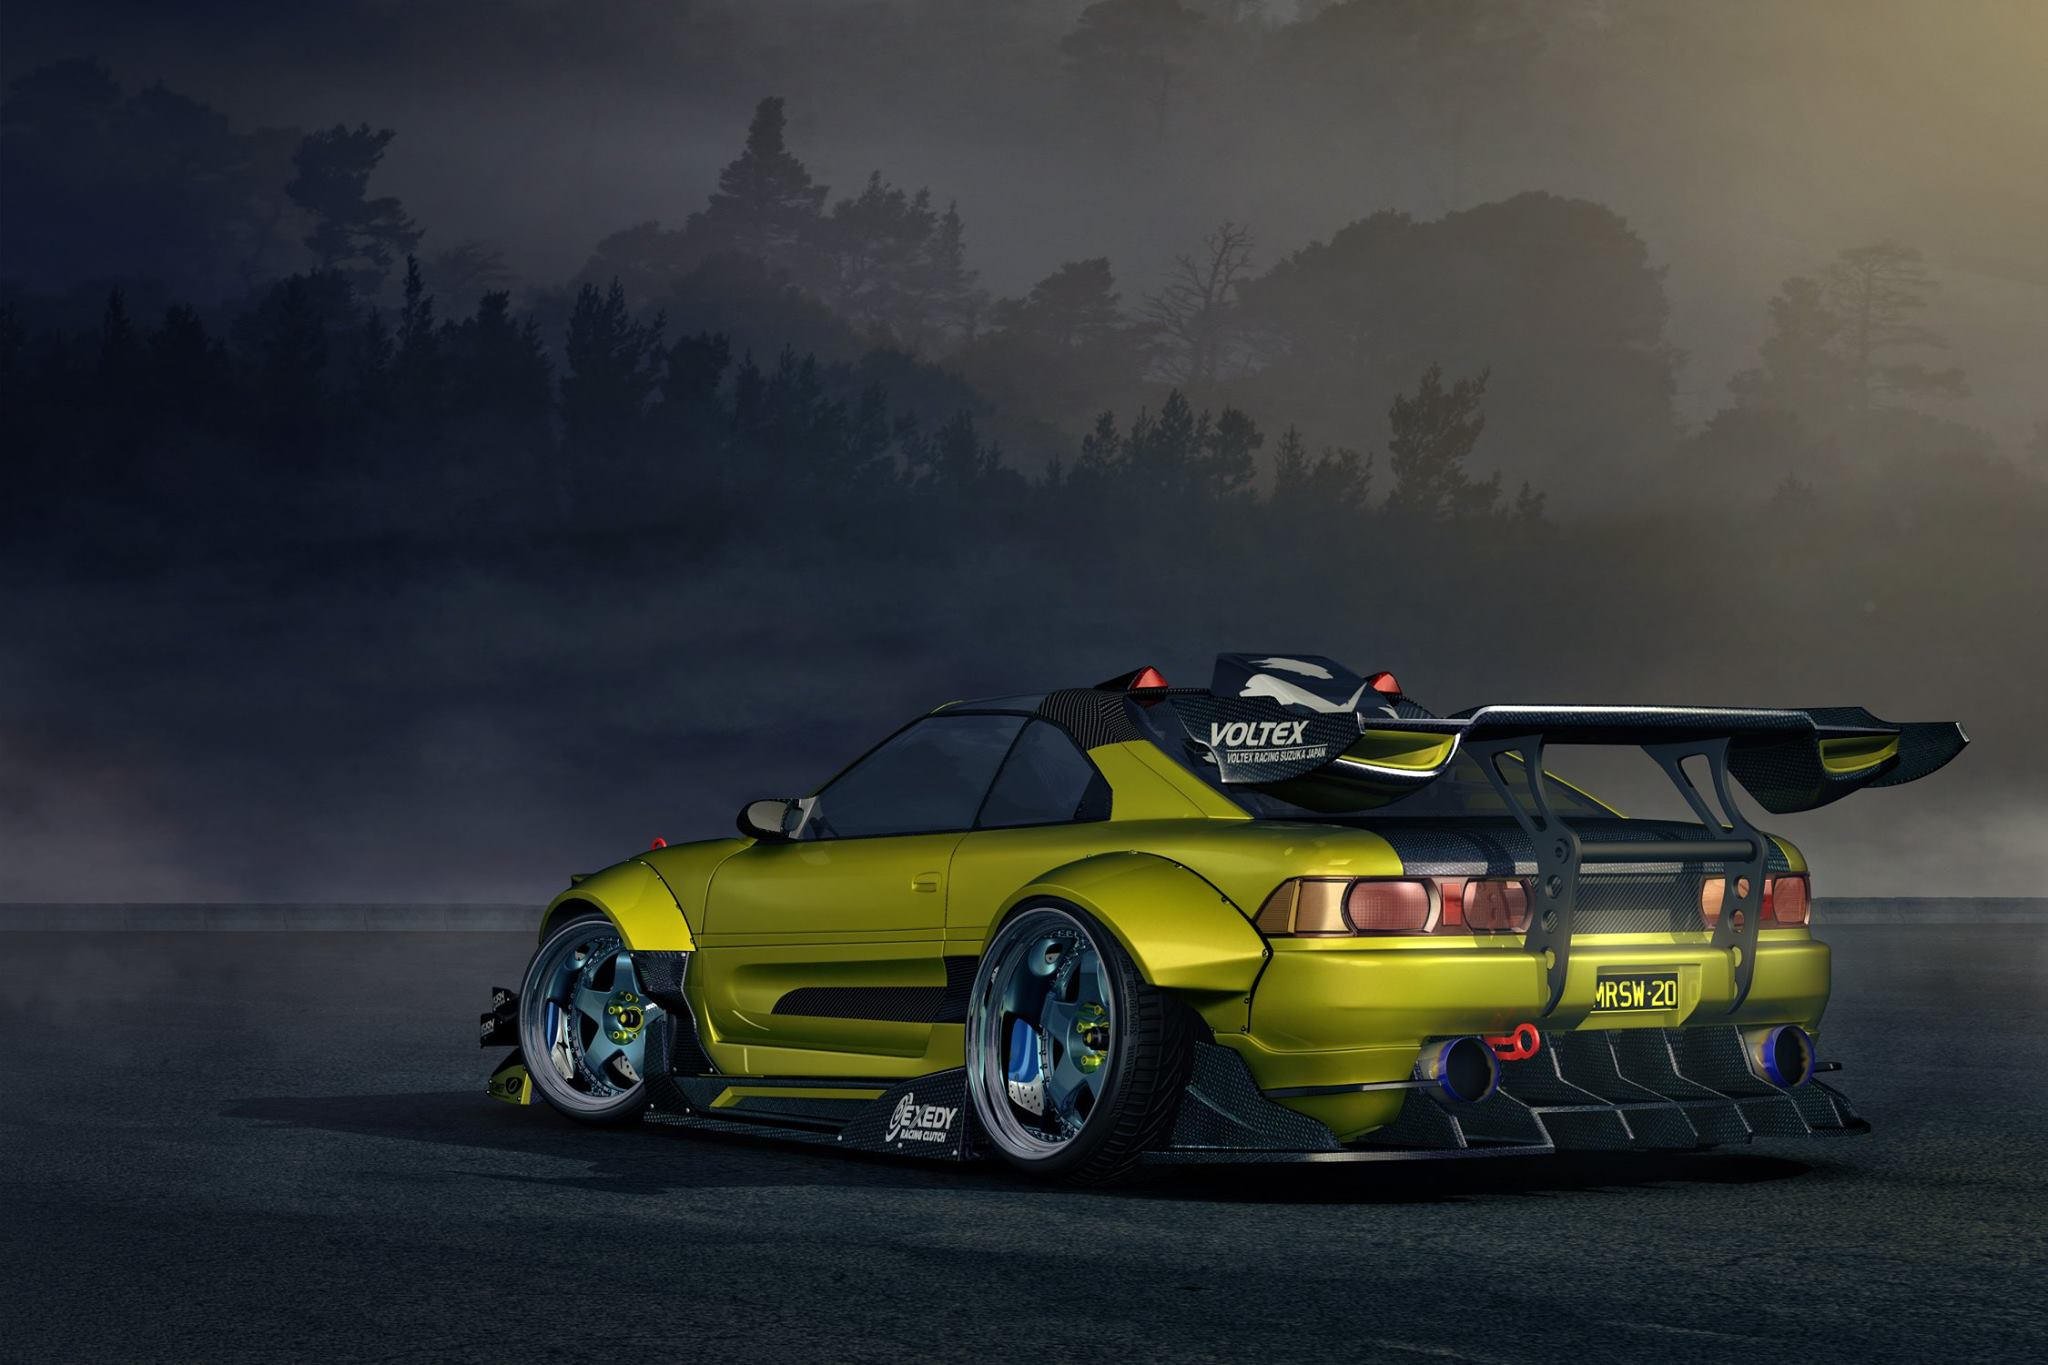 Toyota Mr2 Coupe Spider Japan Tuning Cars Wallpaper